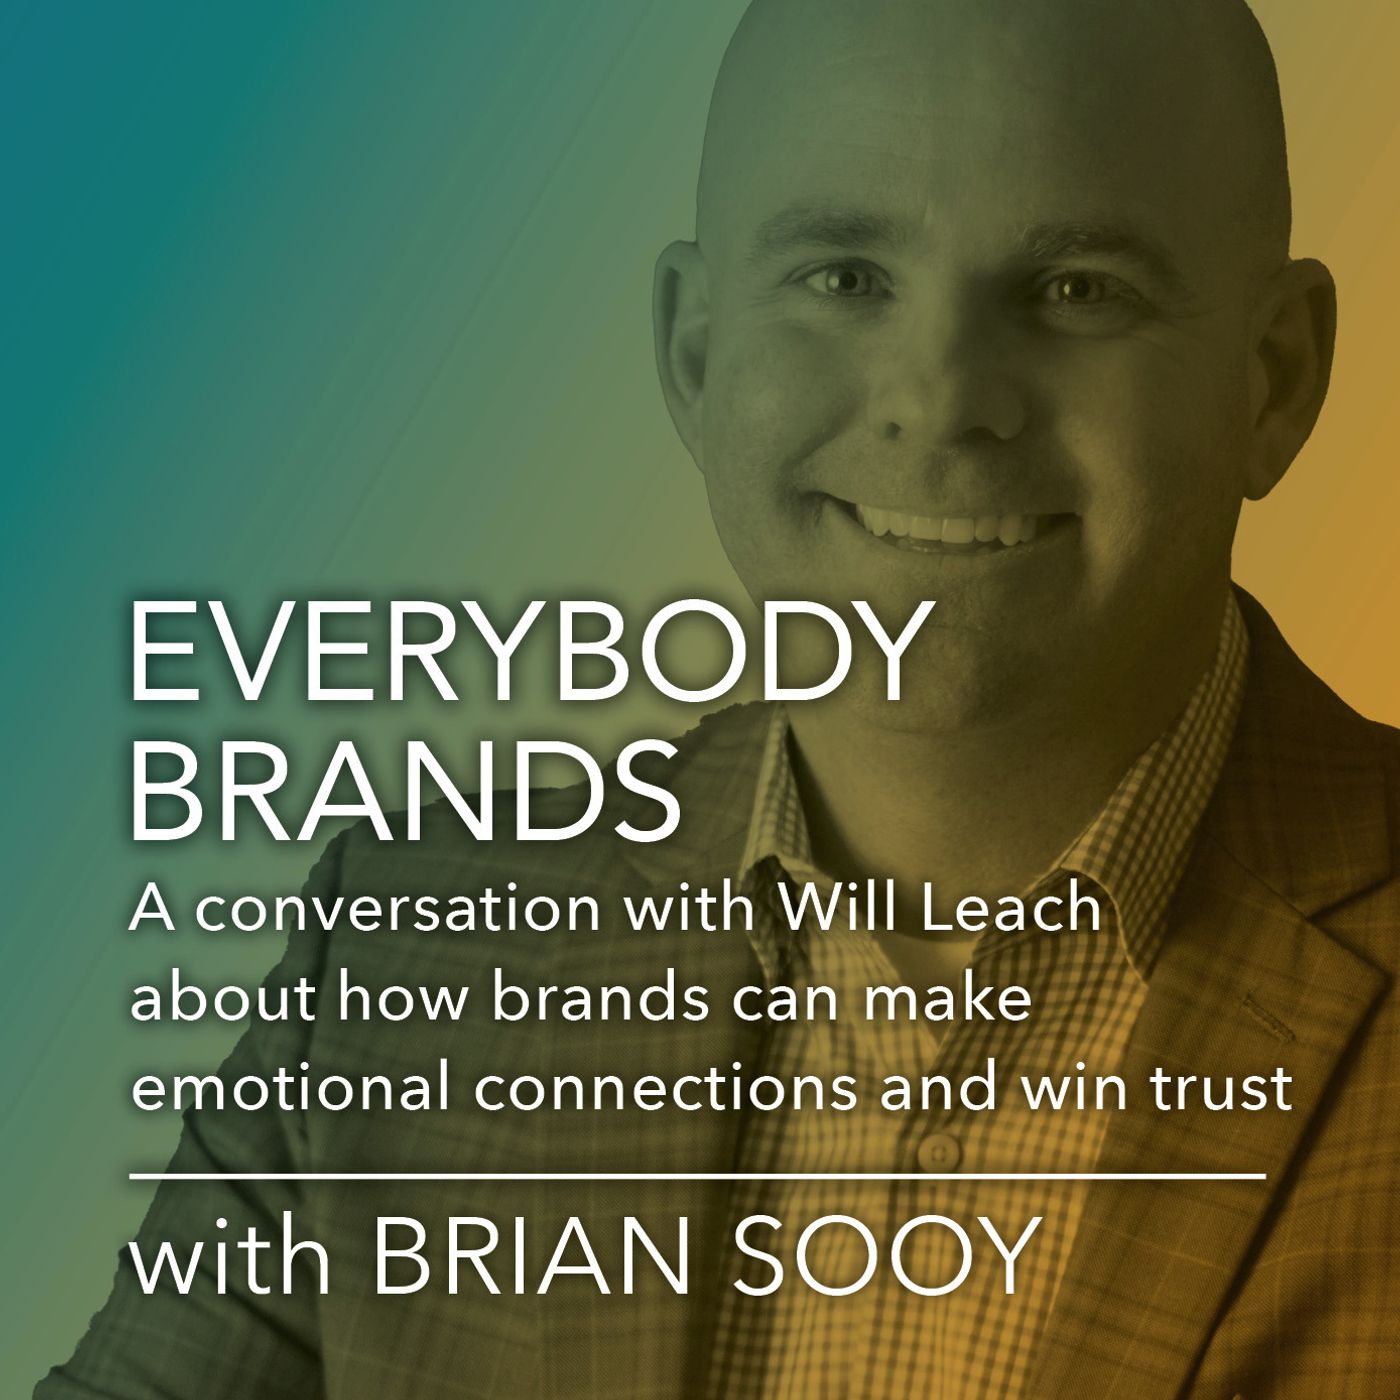 How Your Brand Can Build Trust and Make an Emotional Connection